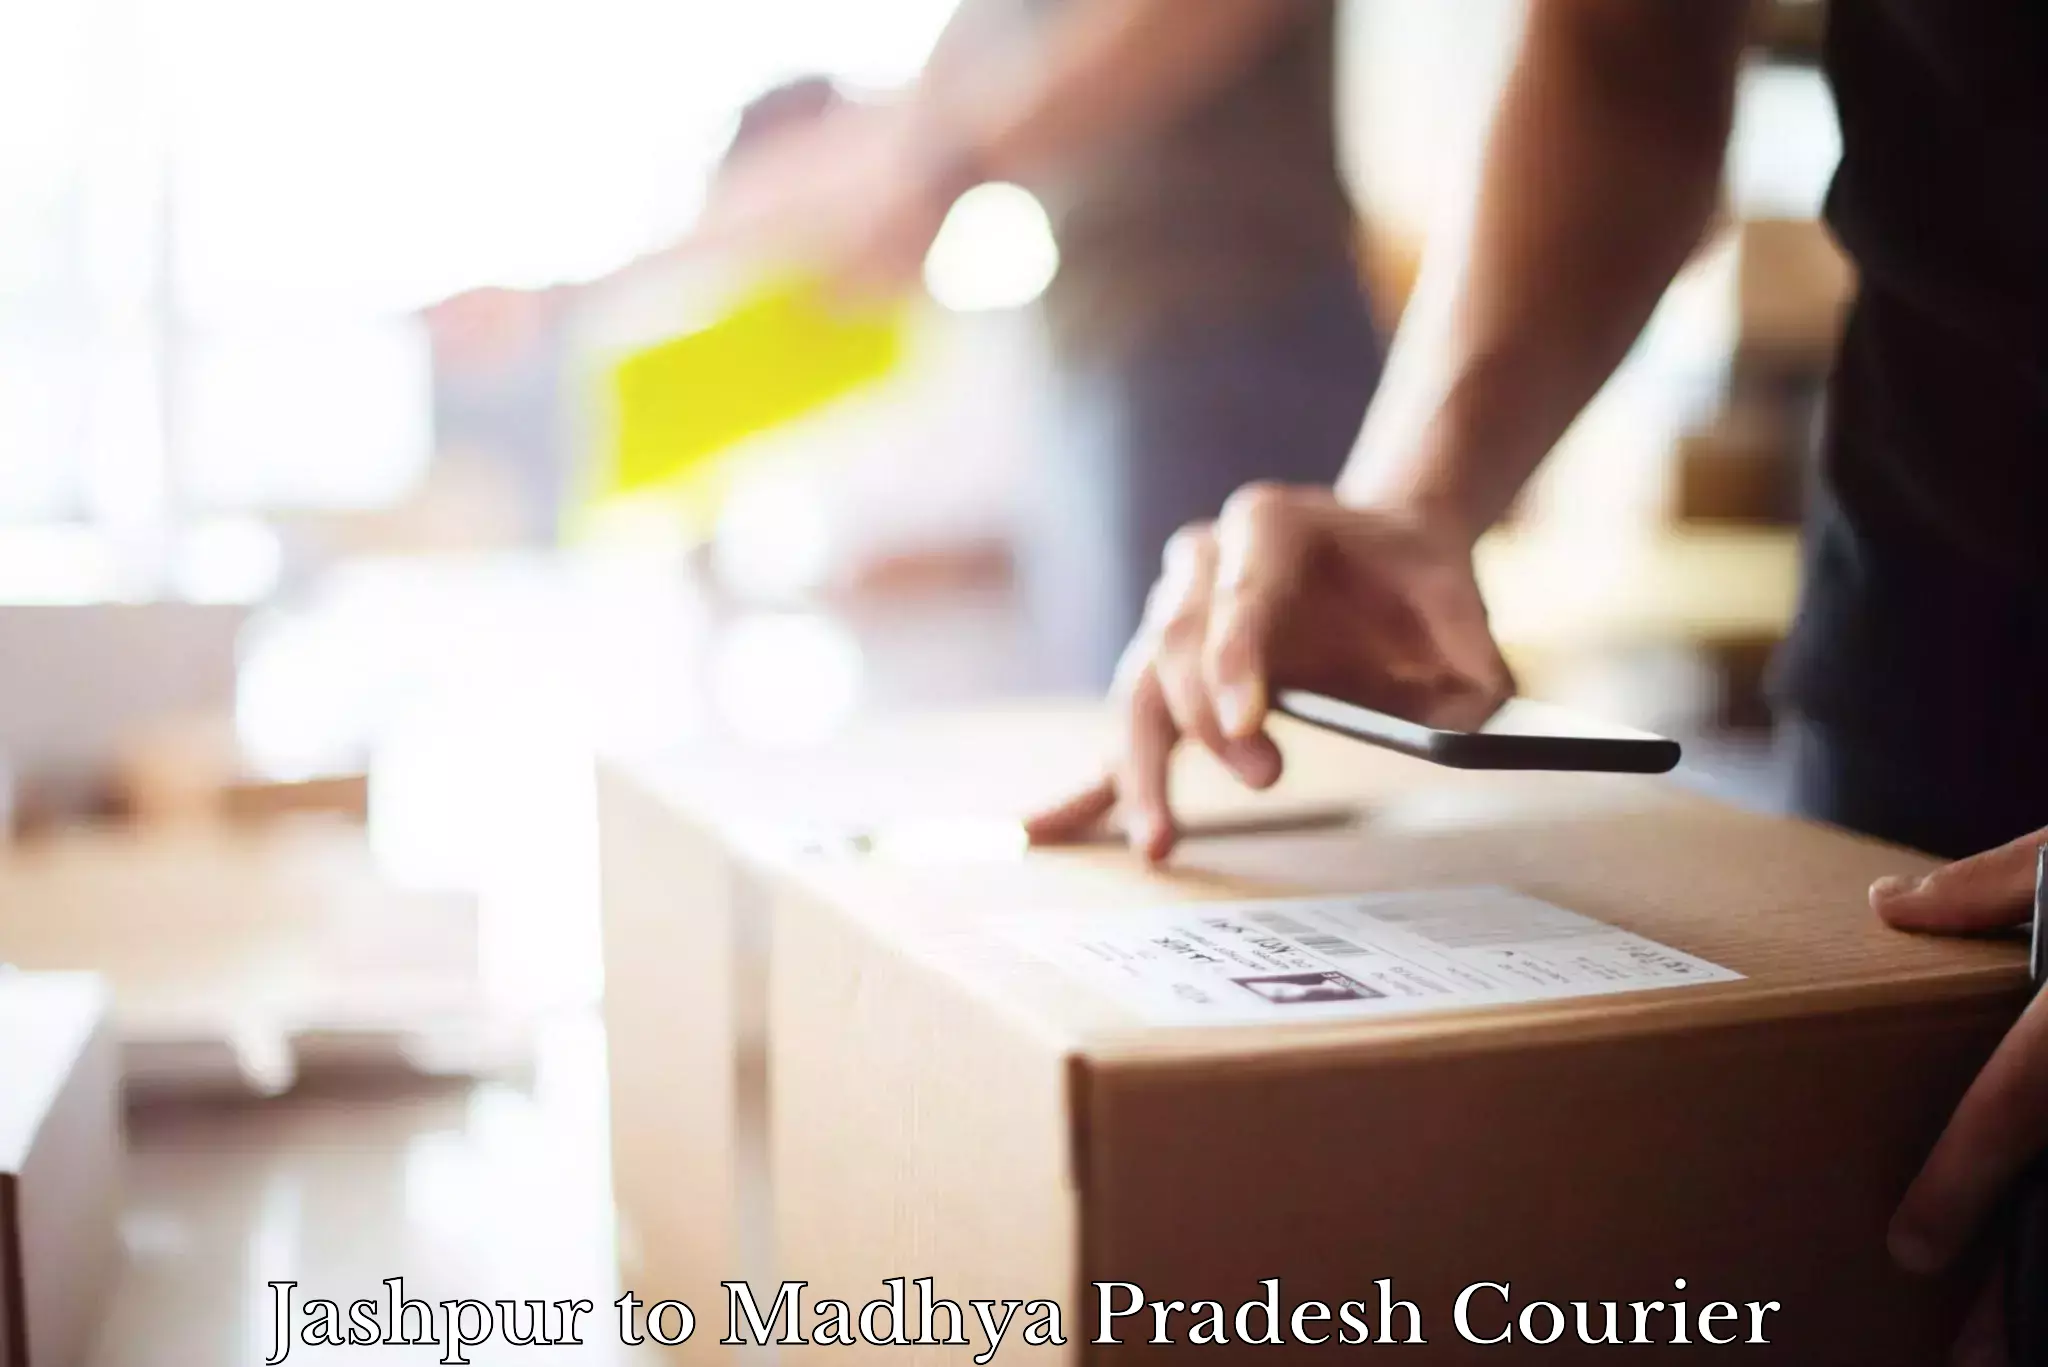 State-of-the-art courier technology Jashpur to Udaipura